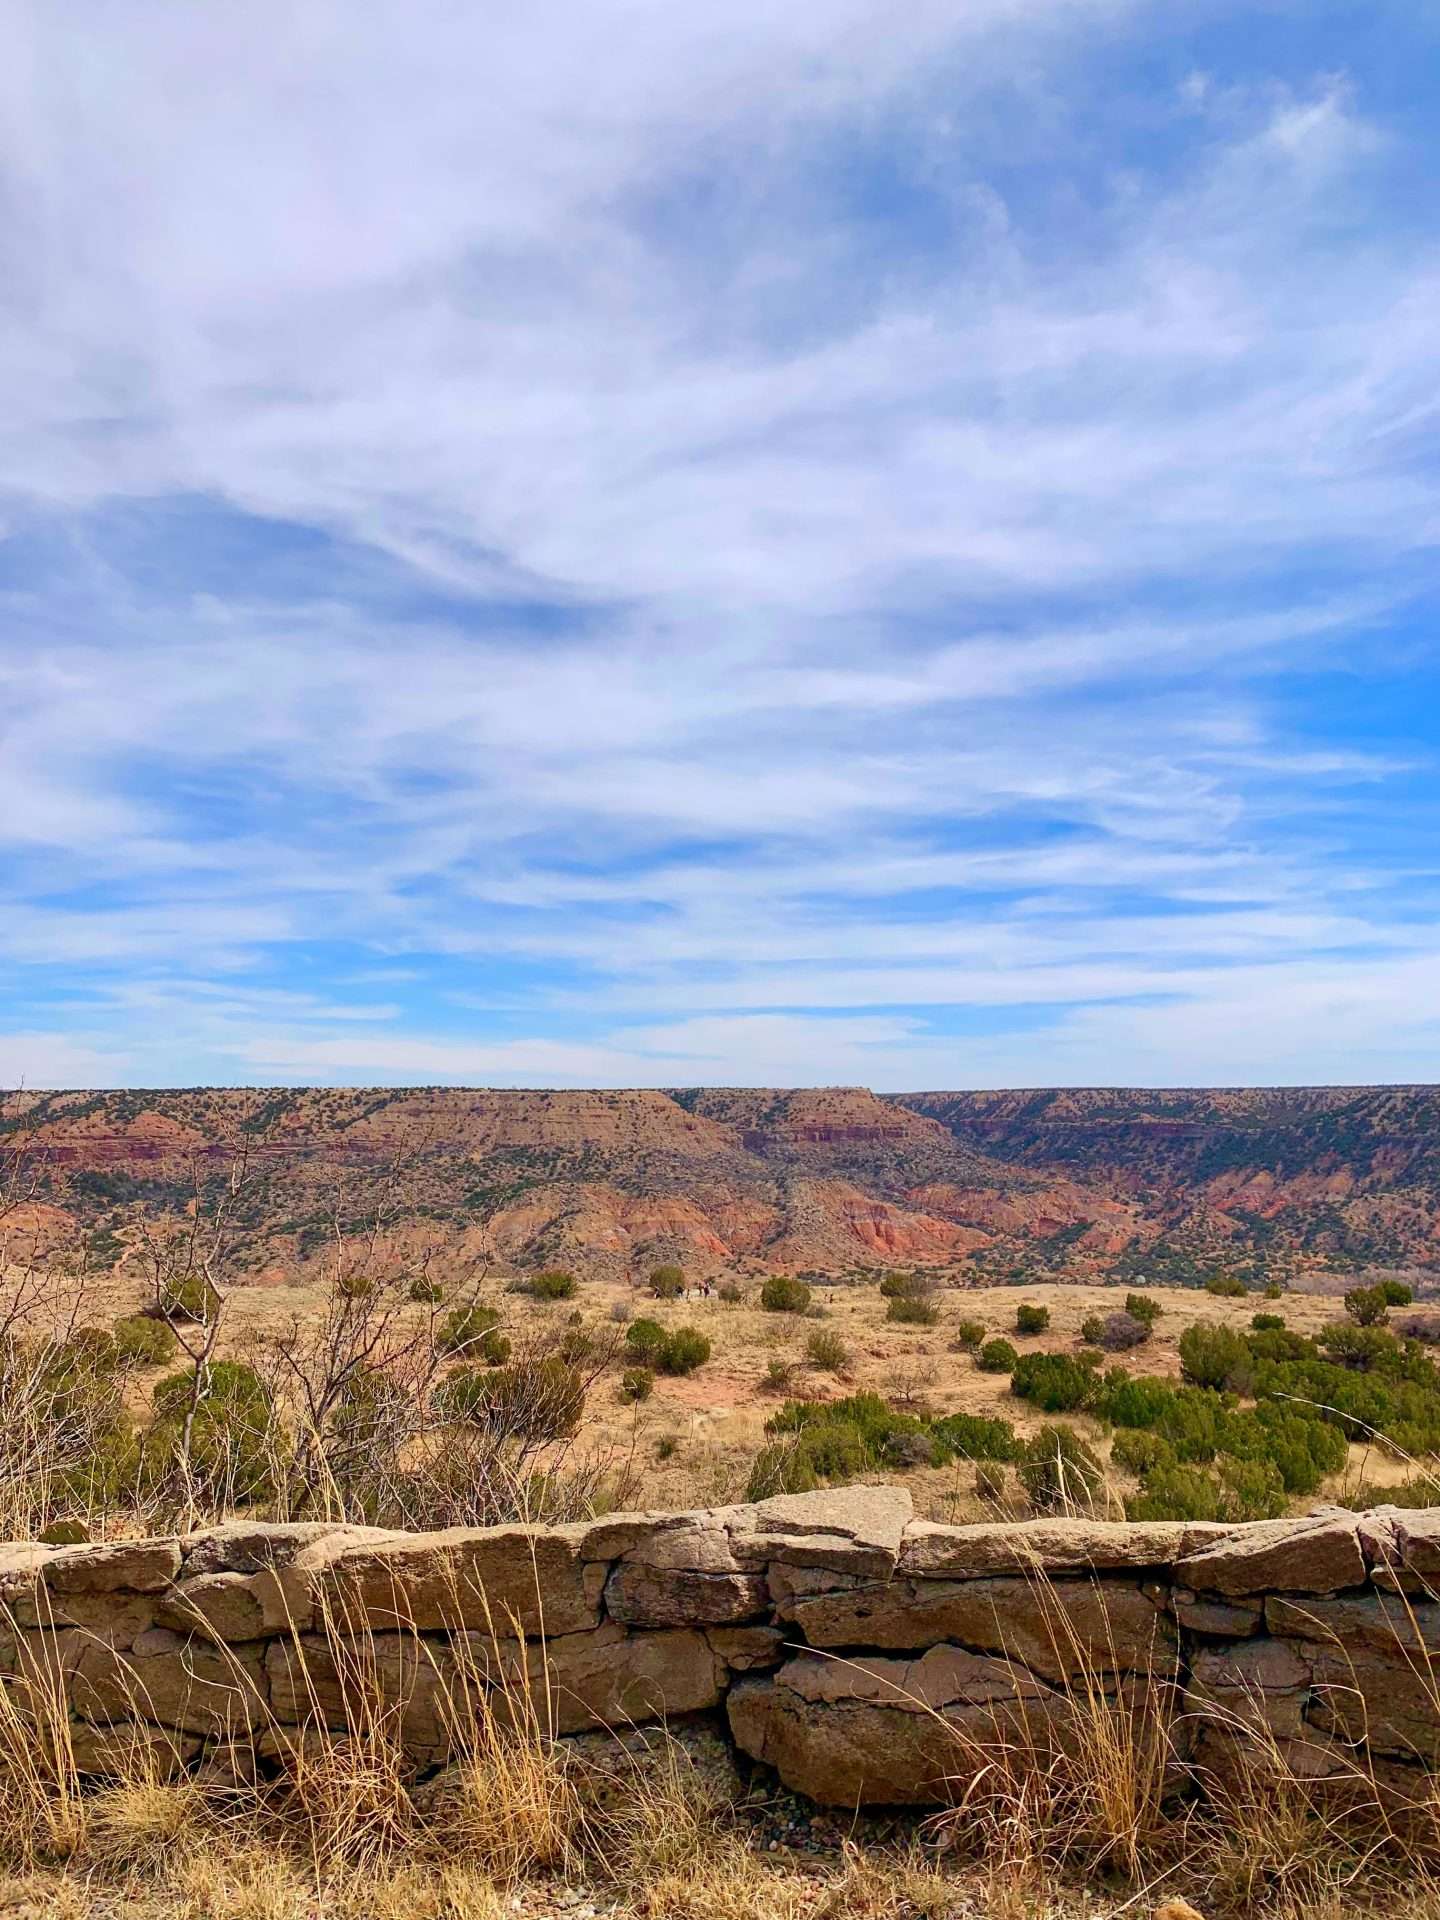 The view from the visitor center at Palo Duro Canyon State Park.